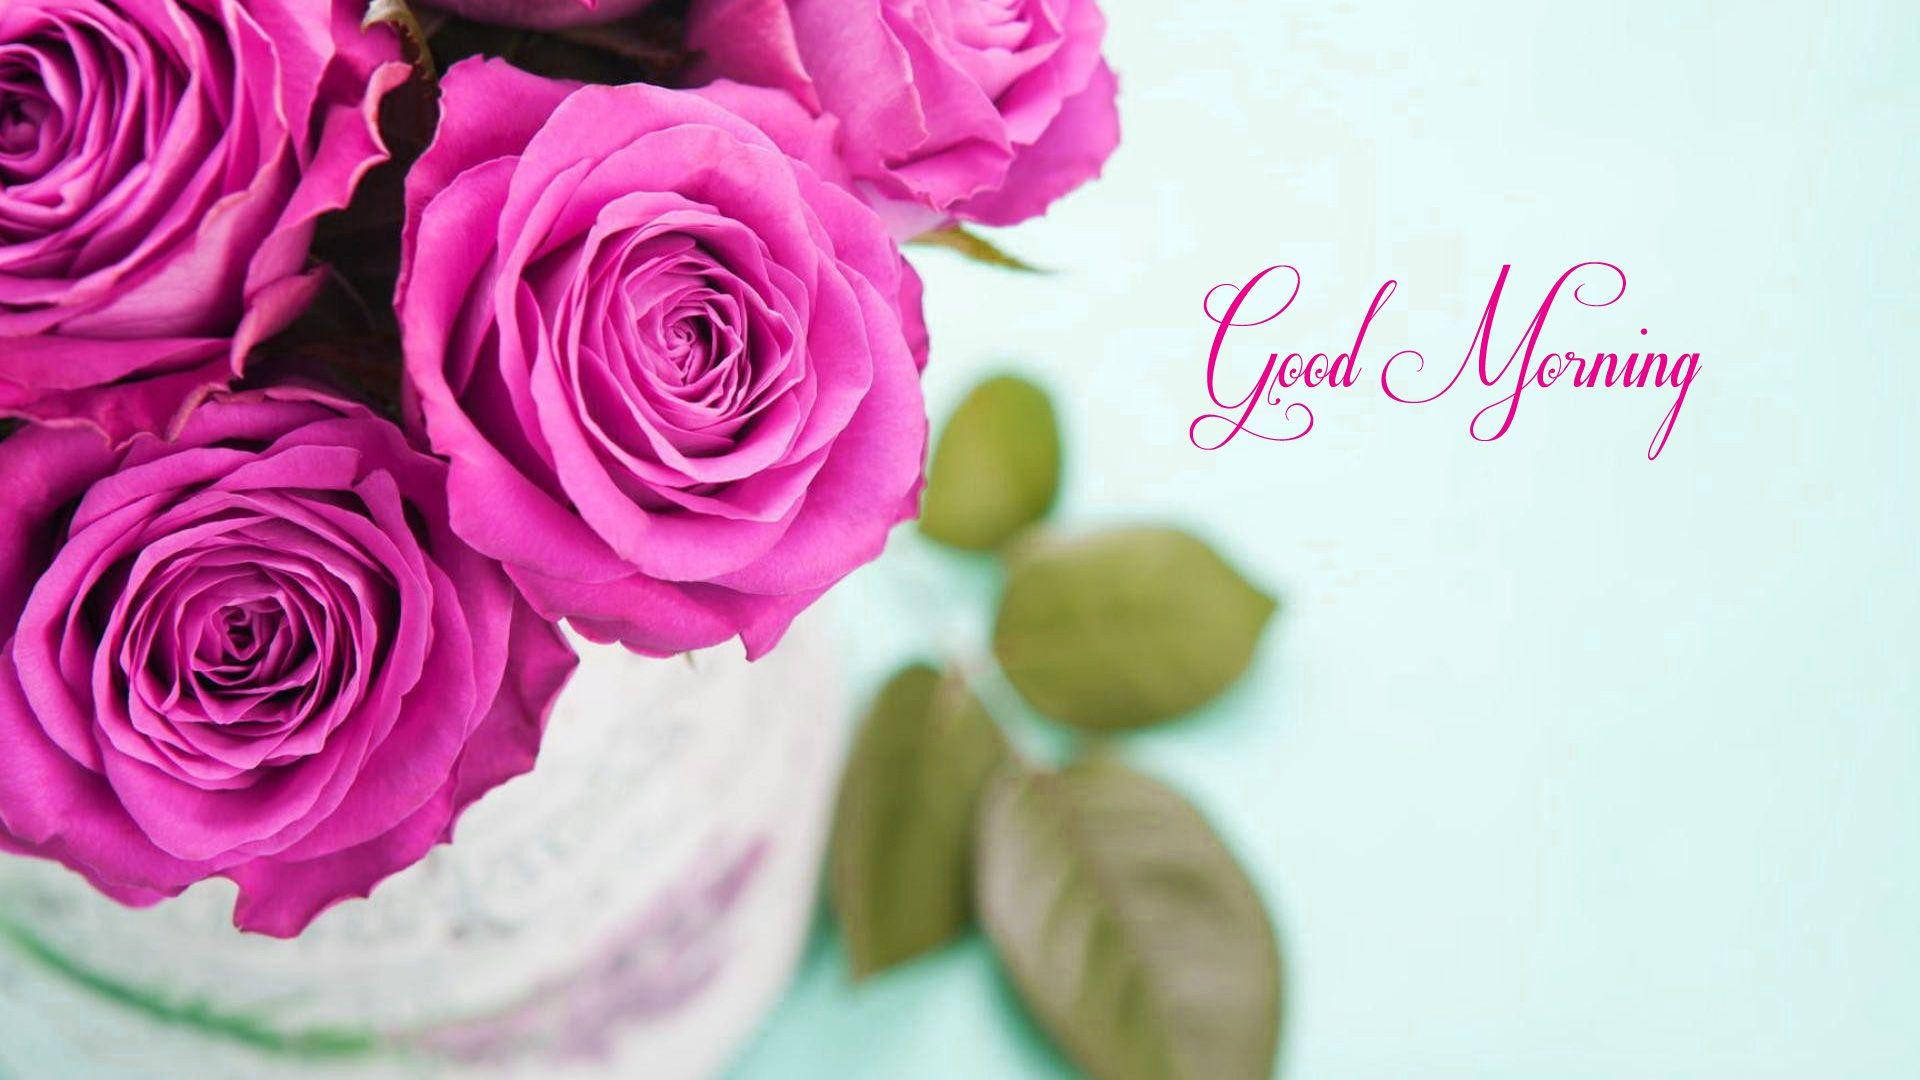 Good Morning HD With Pink Roses Wallpaper